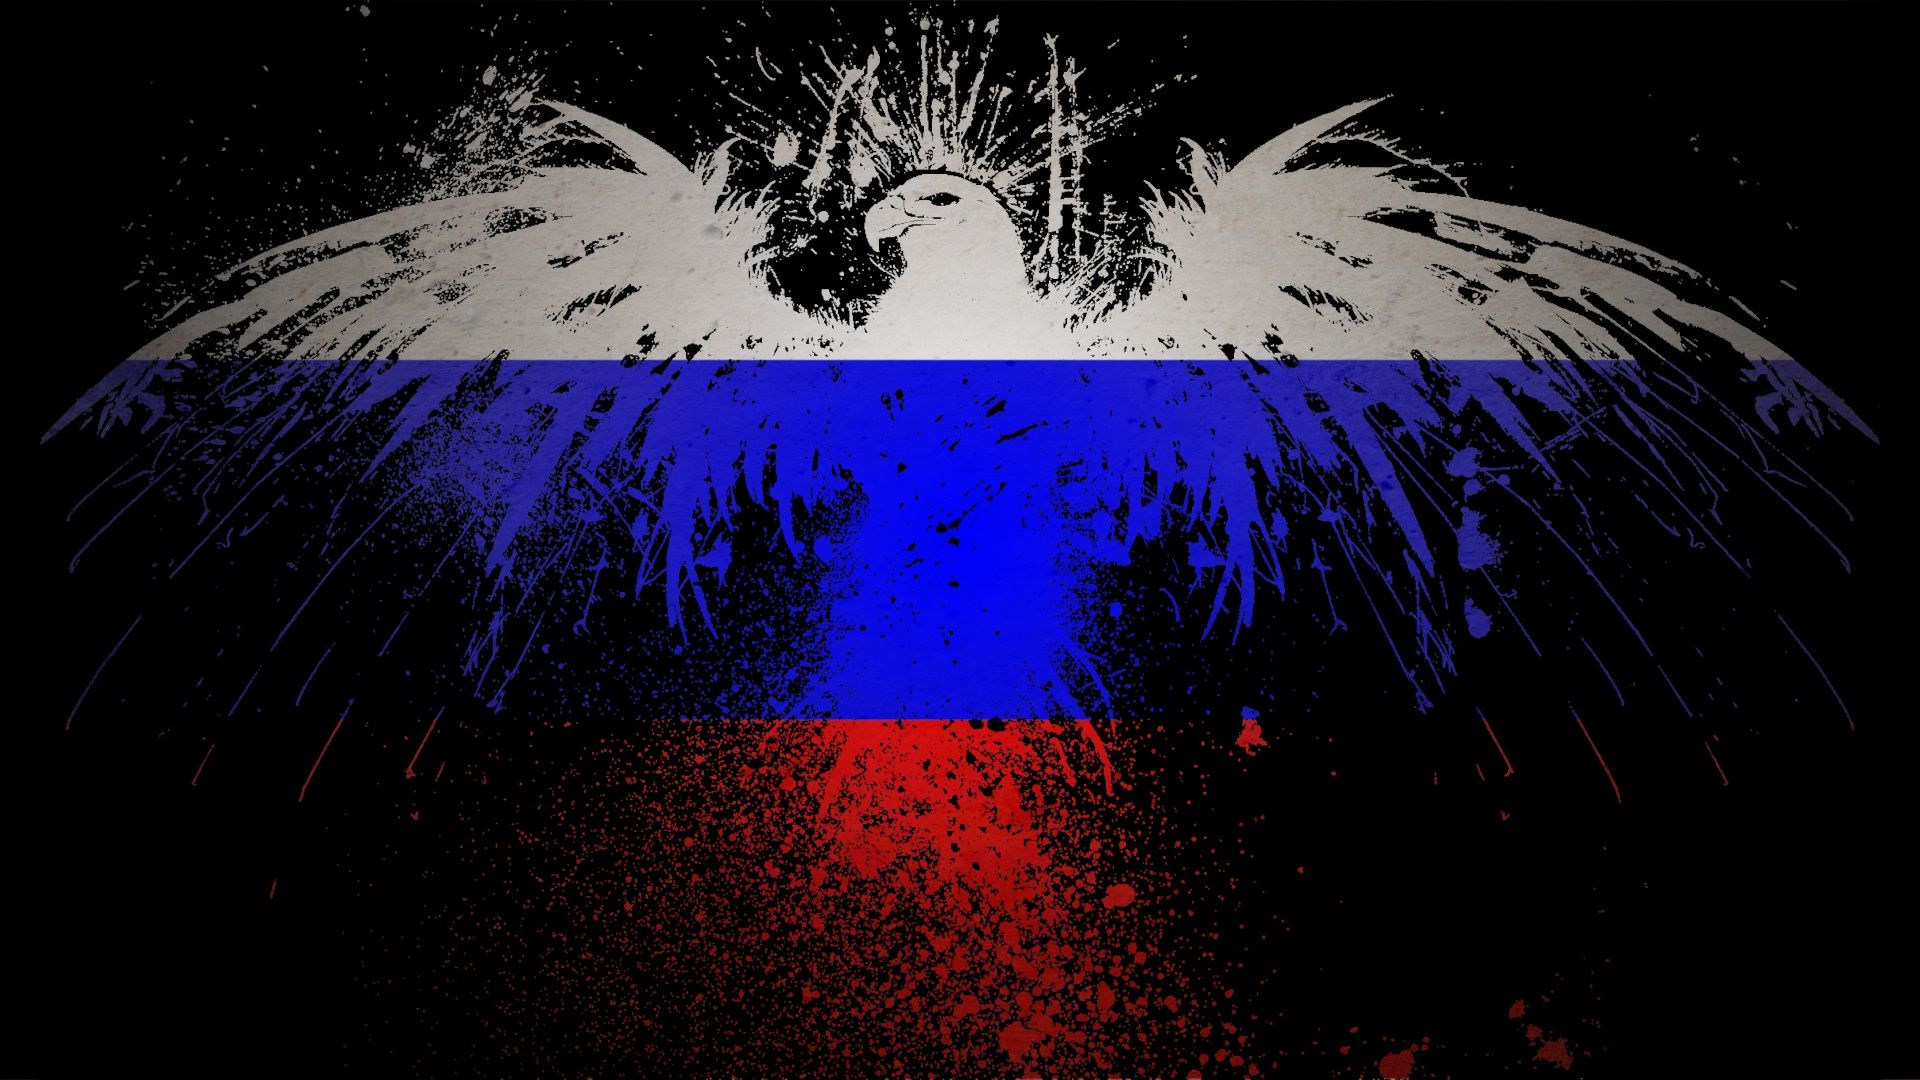 Russian Wallpapers